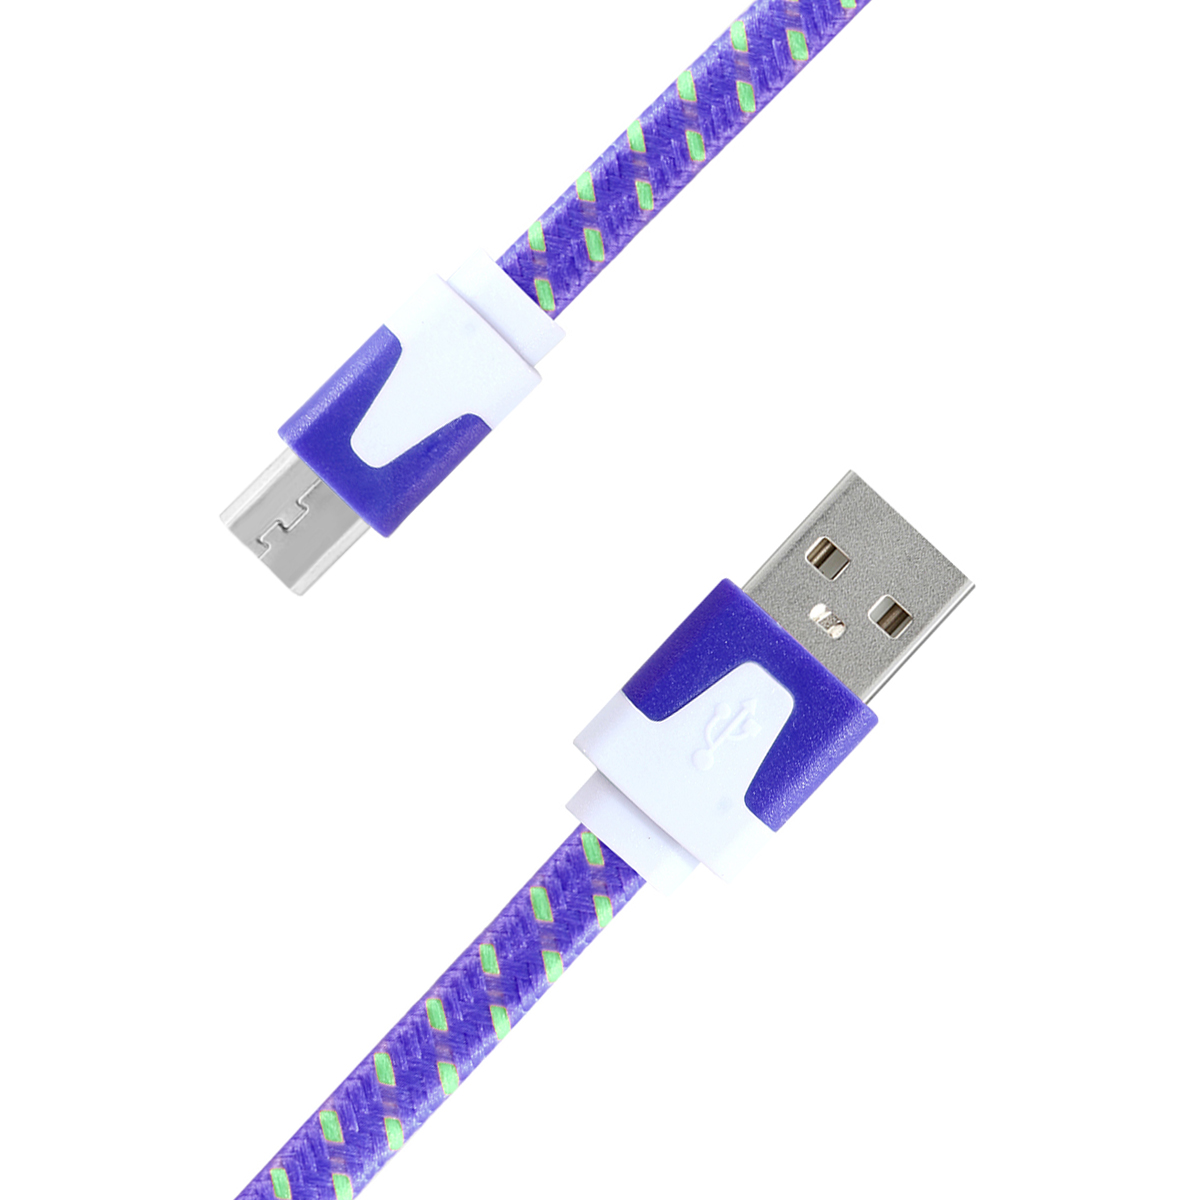 1m Weave Braid USB Data Sync Charging Cable for Samsung Android Phones - Purple